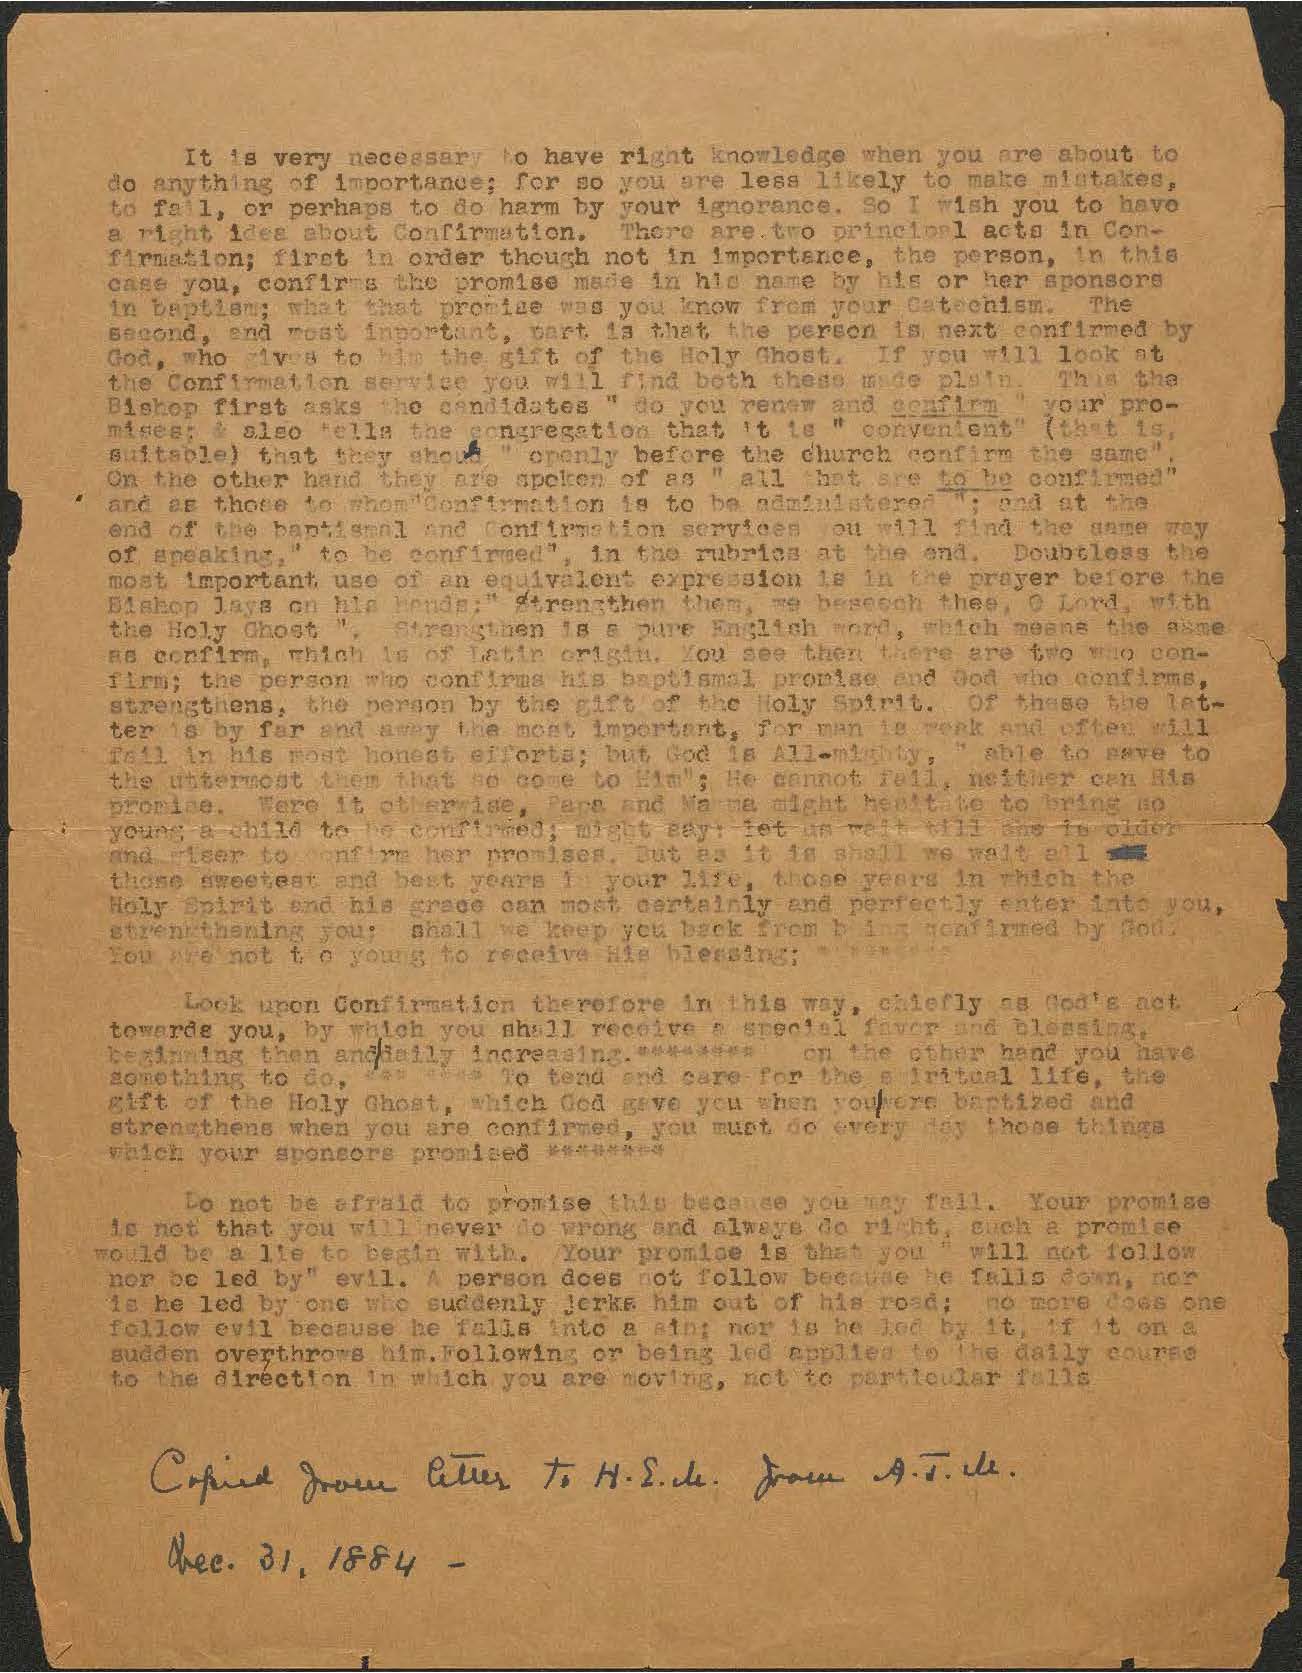 Extract from letter to Helen E. Mahan from Alfred T. Mahan